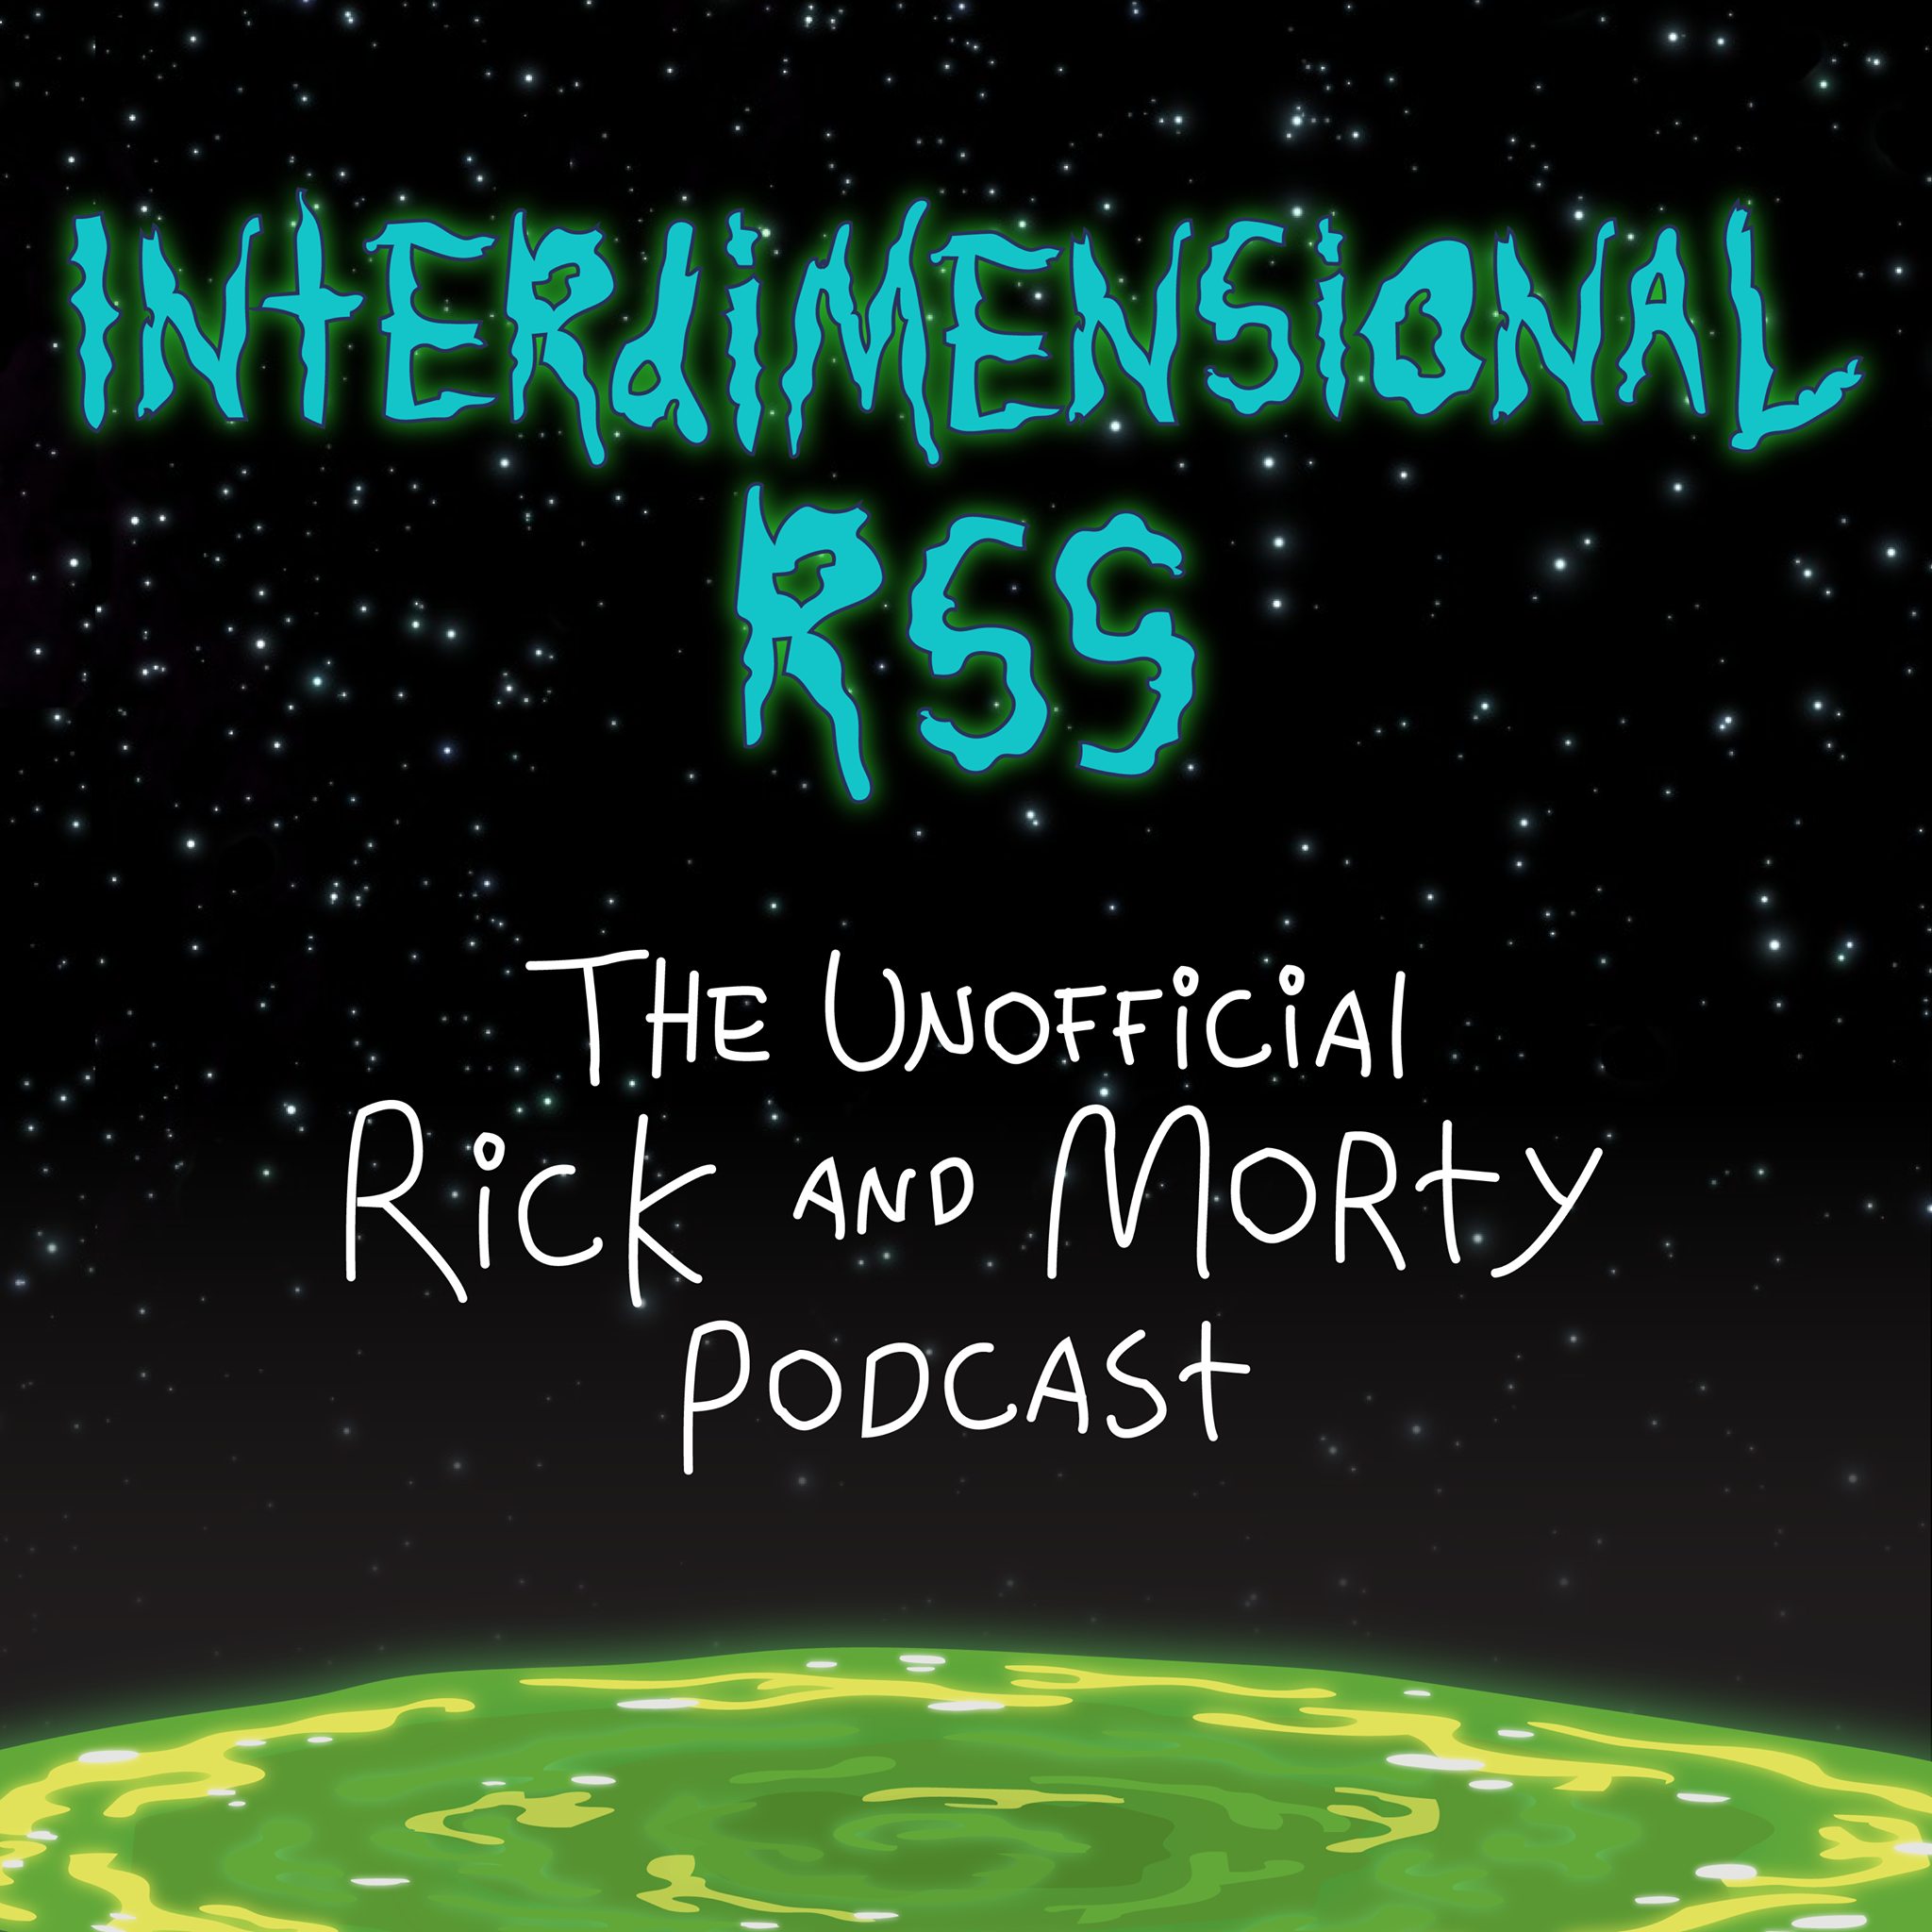 Auto Erotic Assimilation contact interdimensional rss about podcasting